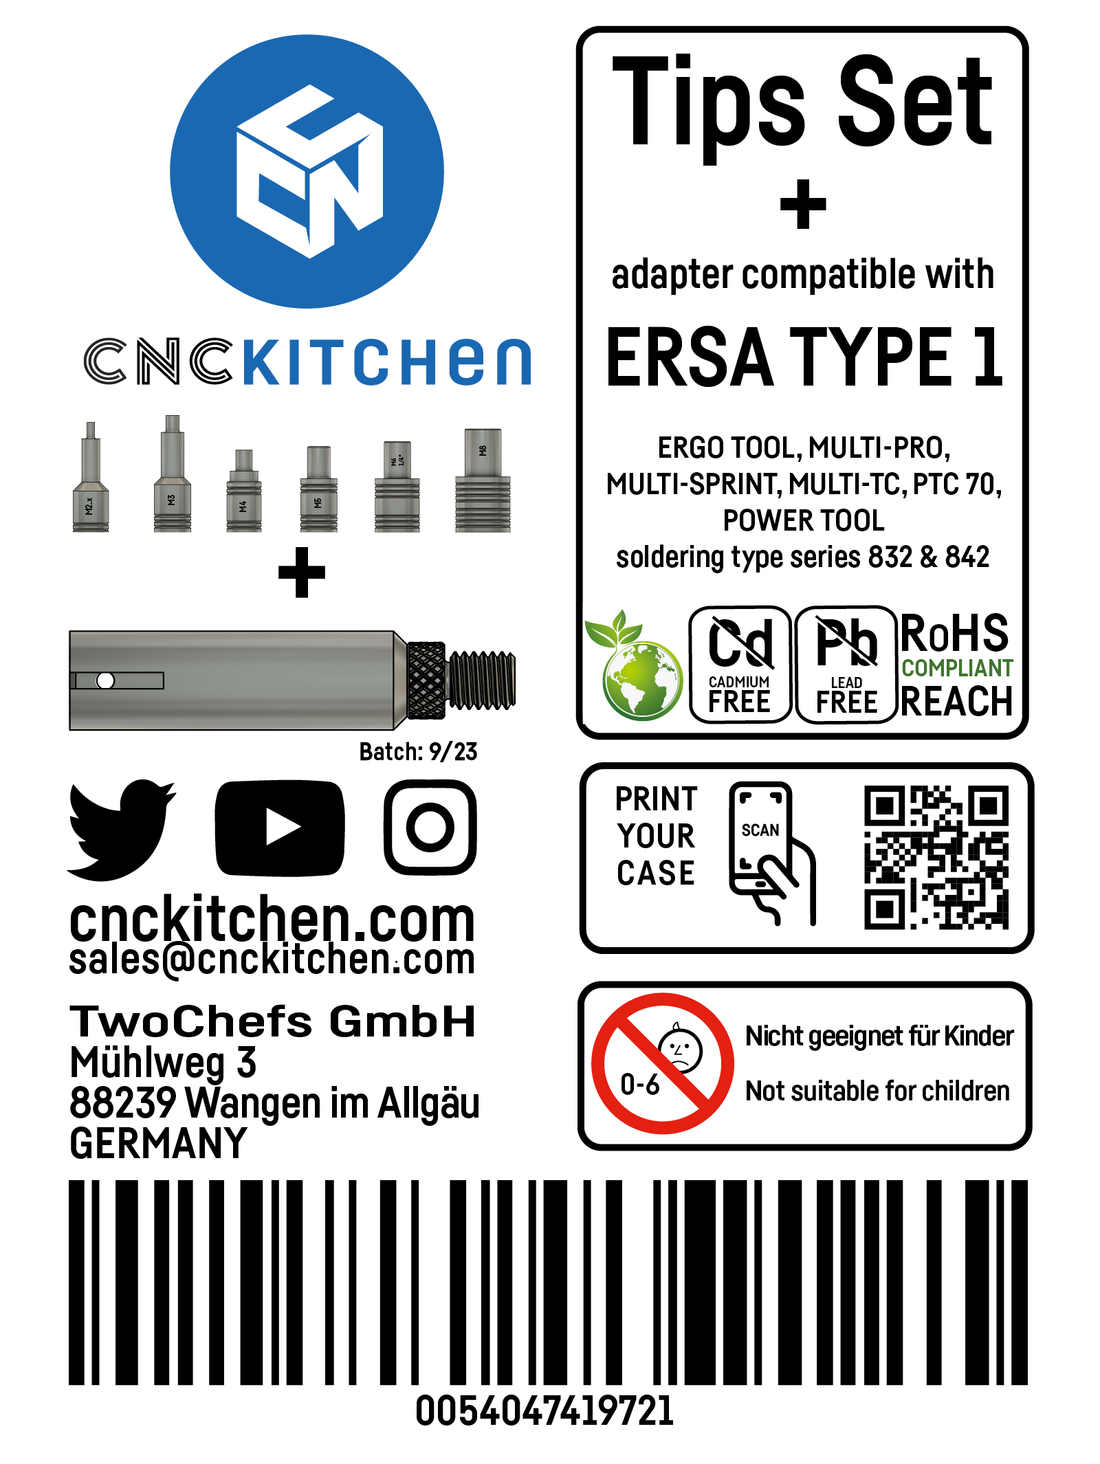 CNC Kitchen Soldering Tips + Adapter compatible with ERSA tips series 832 & 842